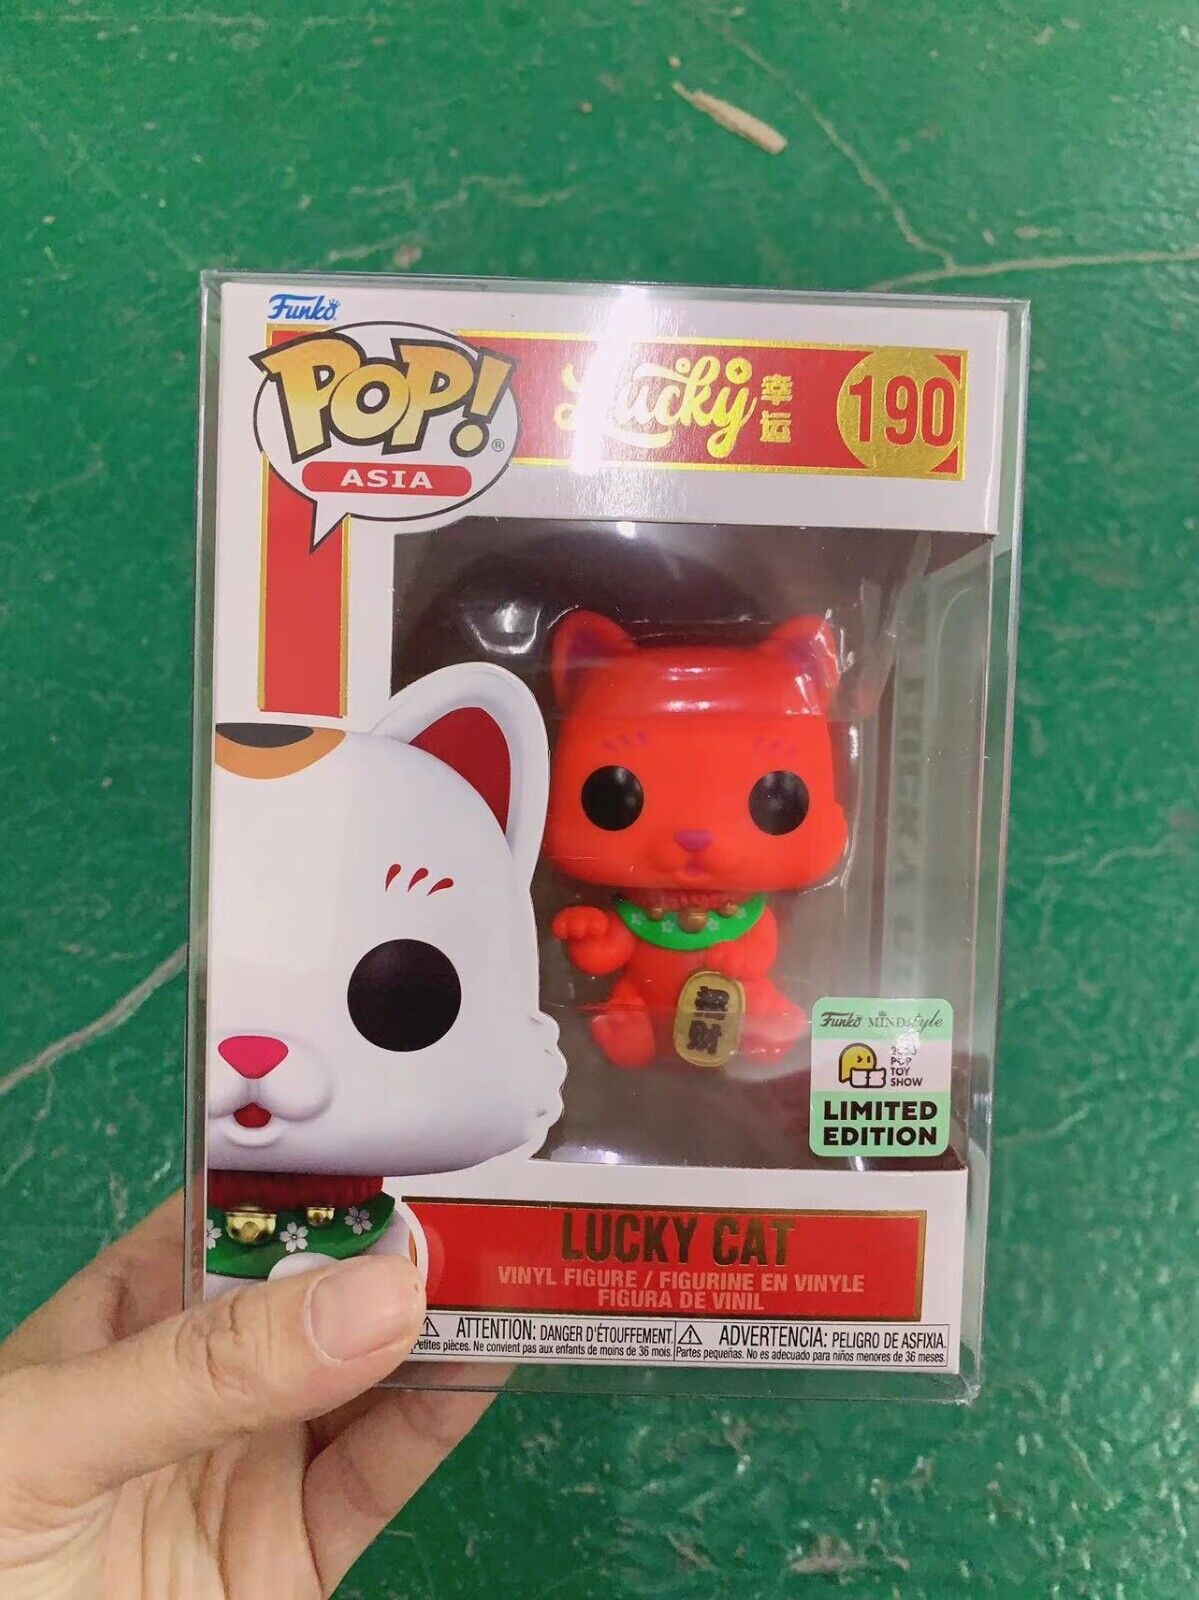 Funko pop Asia exclusive red lucky cat toy